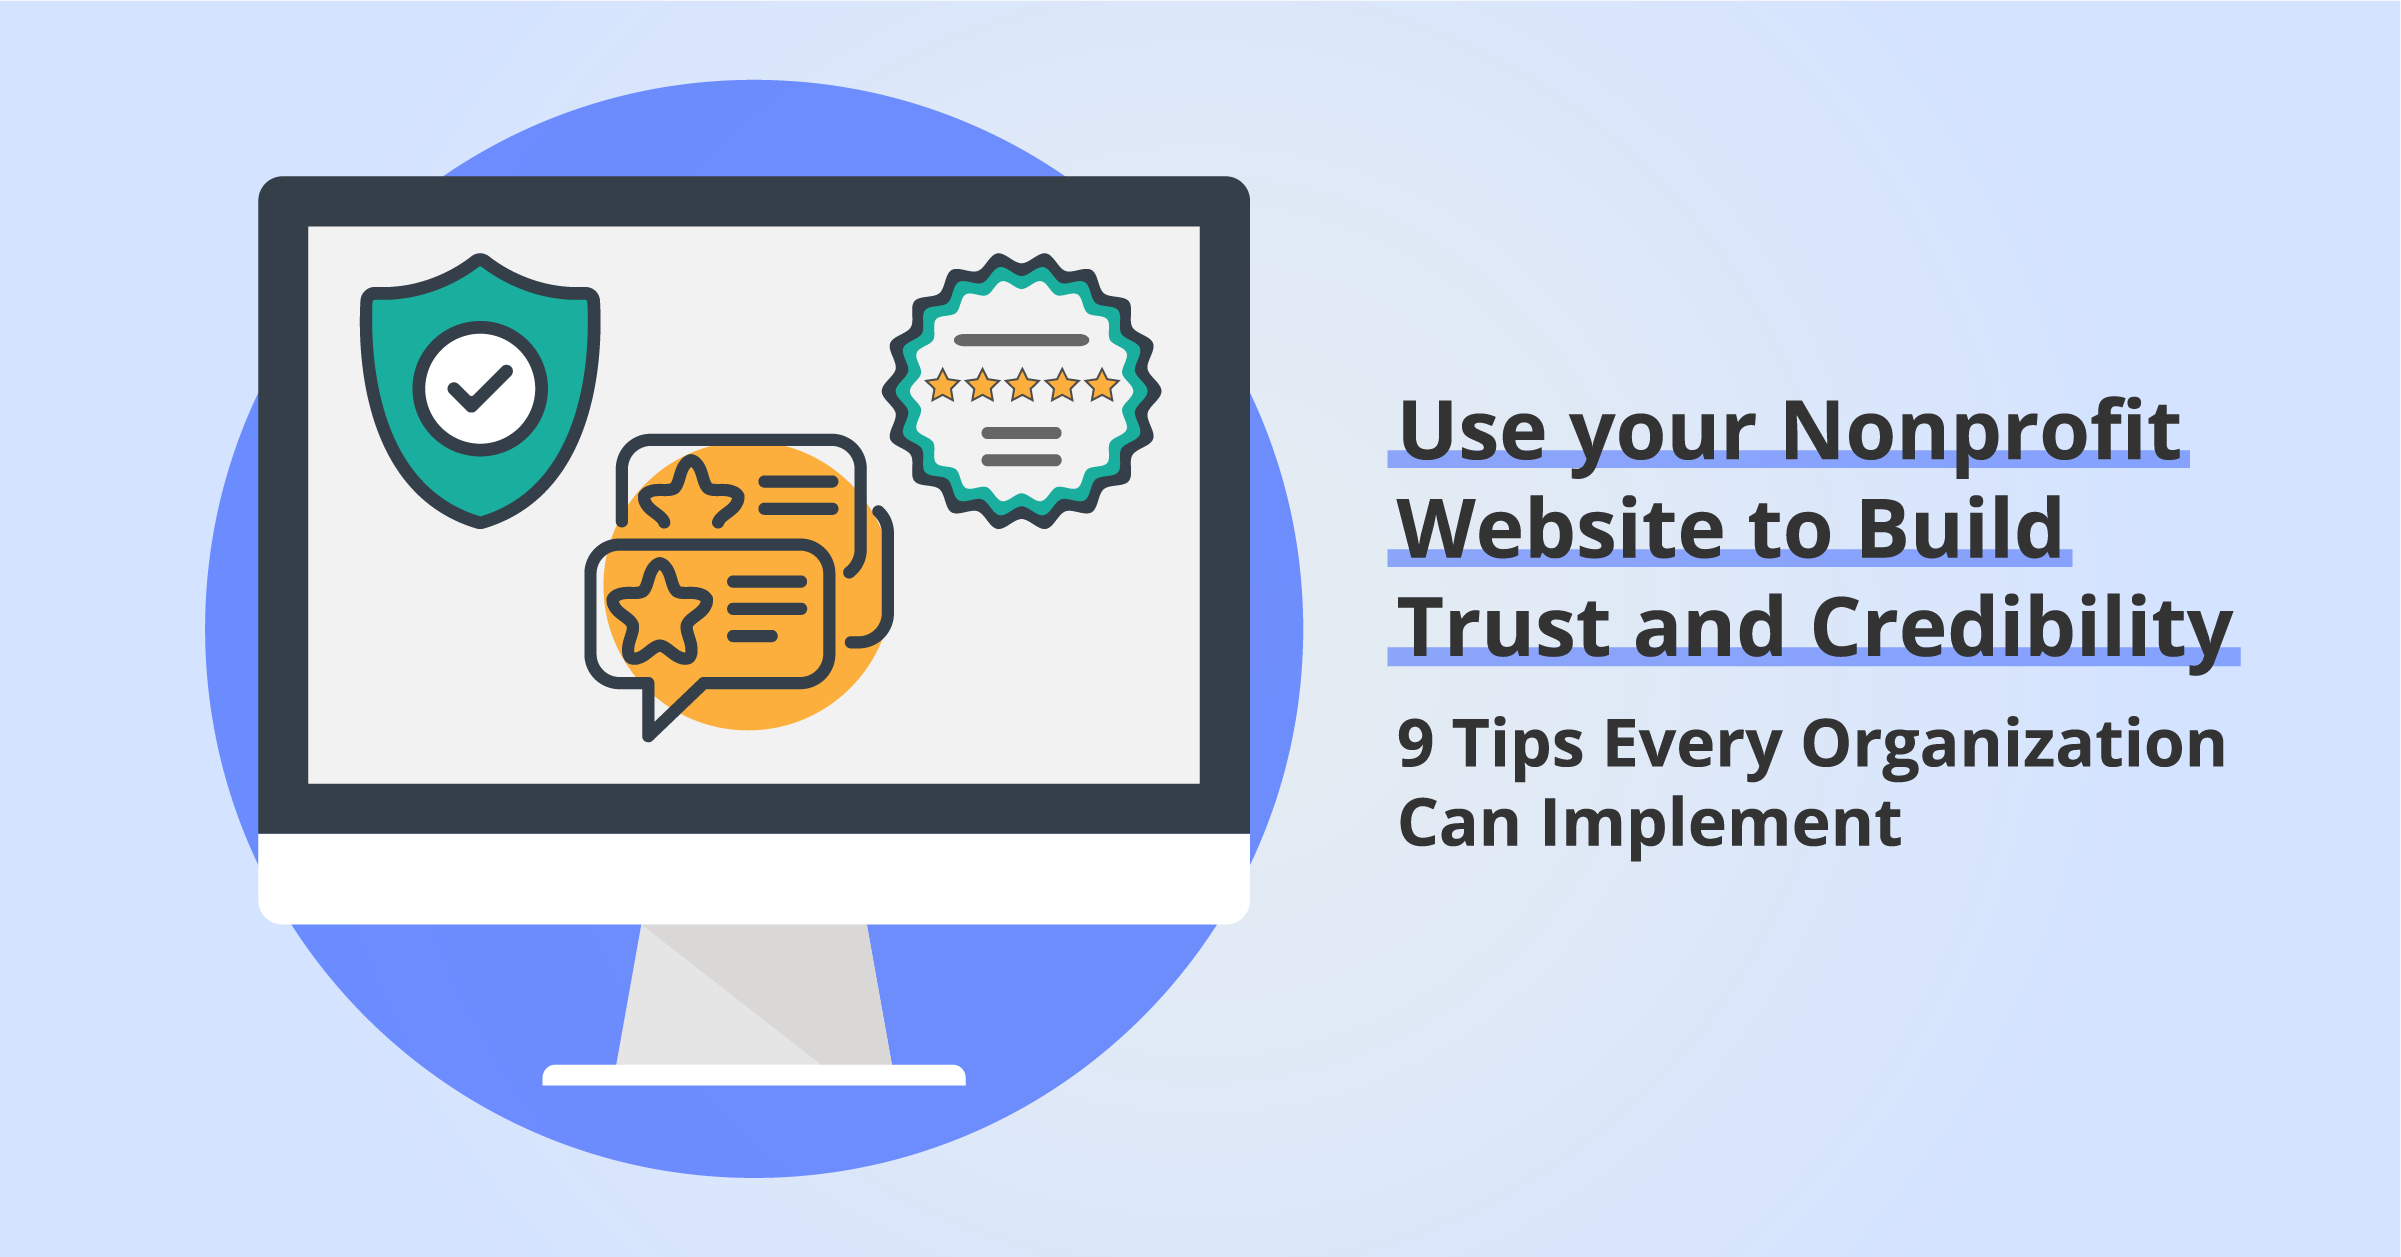 Use your Nonprofit Website to Build Trust and Credibility: 9 Tips Every Organization Can Implement